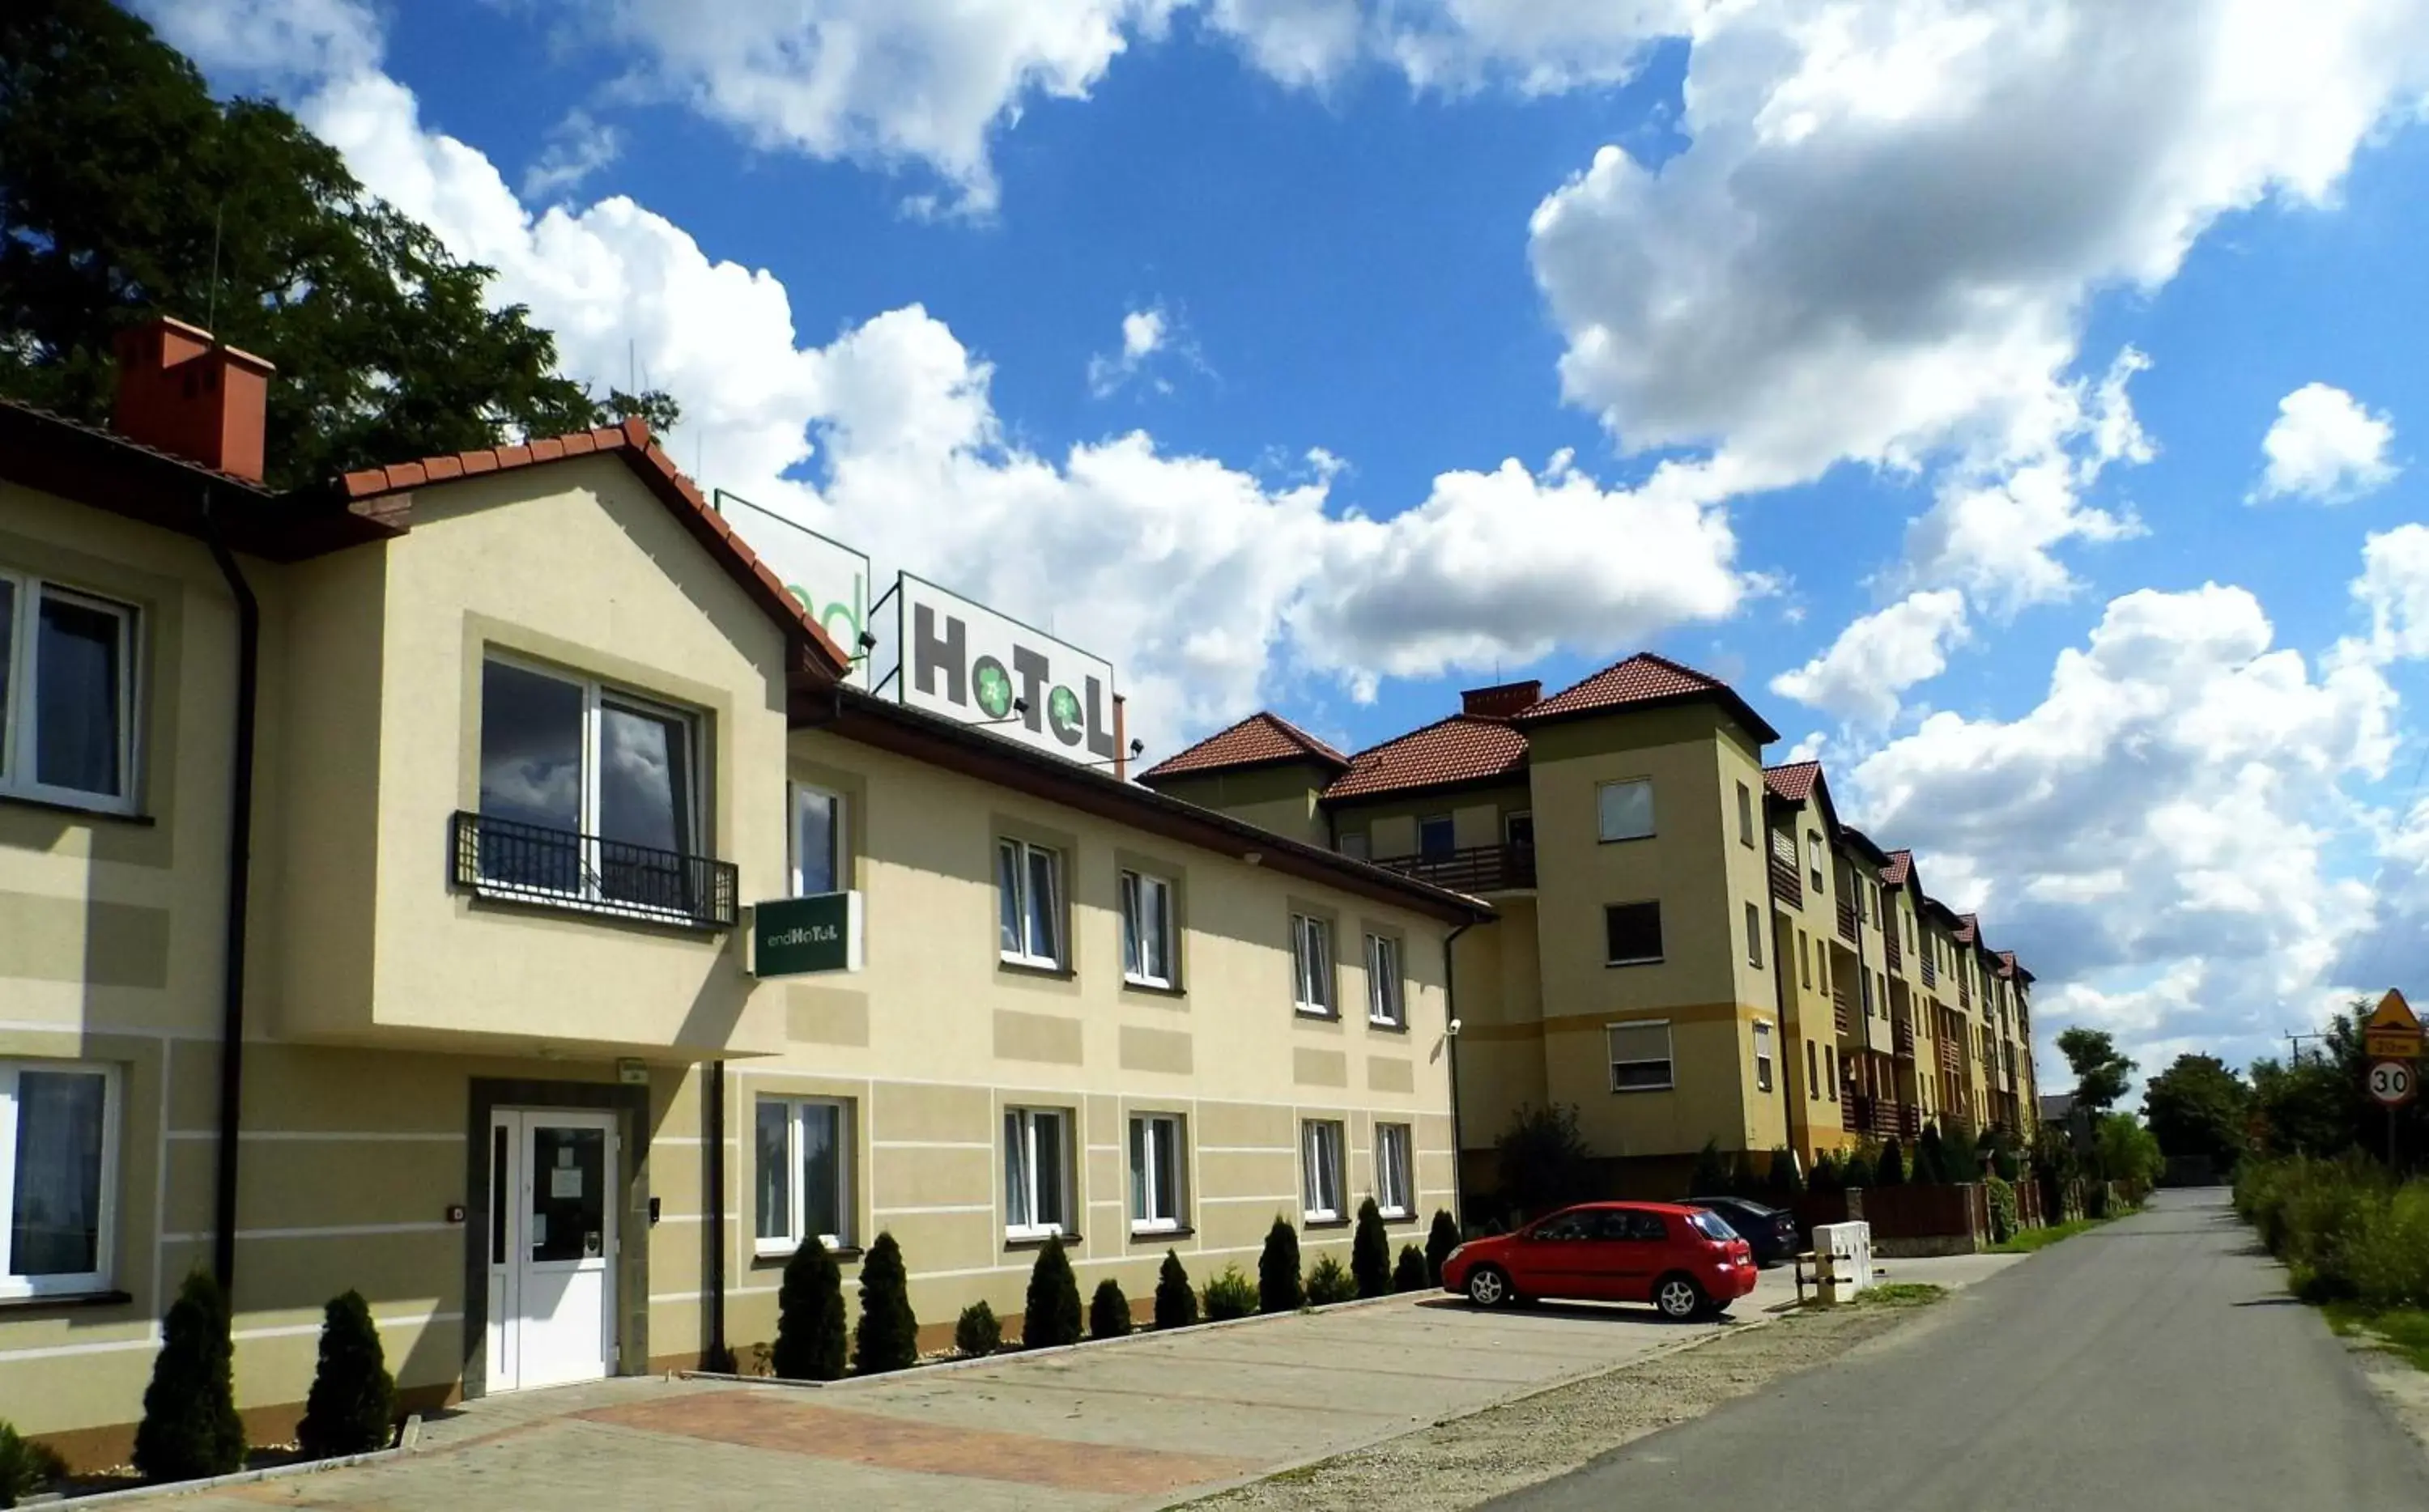 Property Building in EndHotel Bielany Wroclawskie